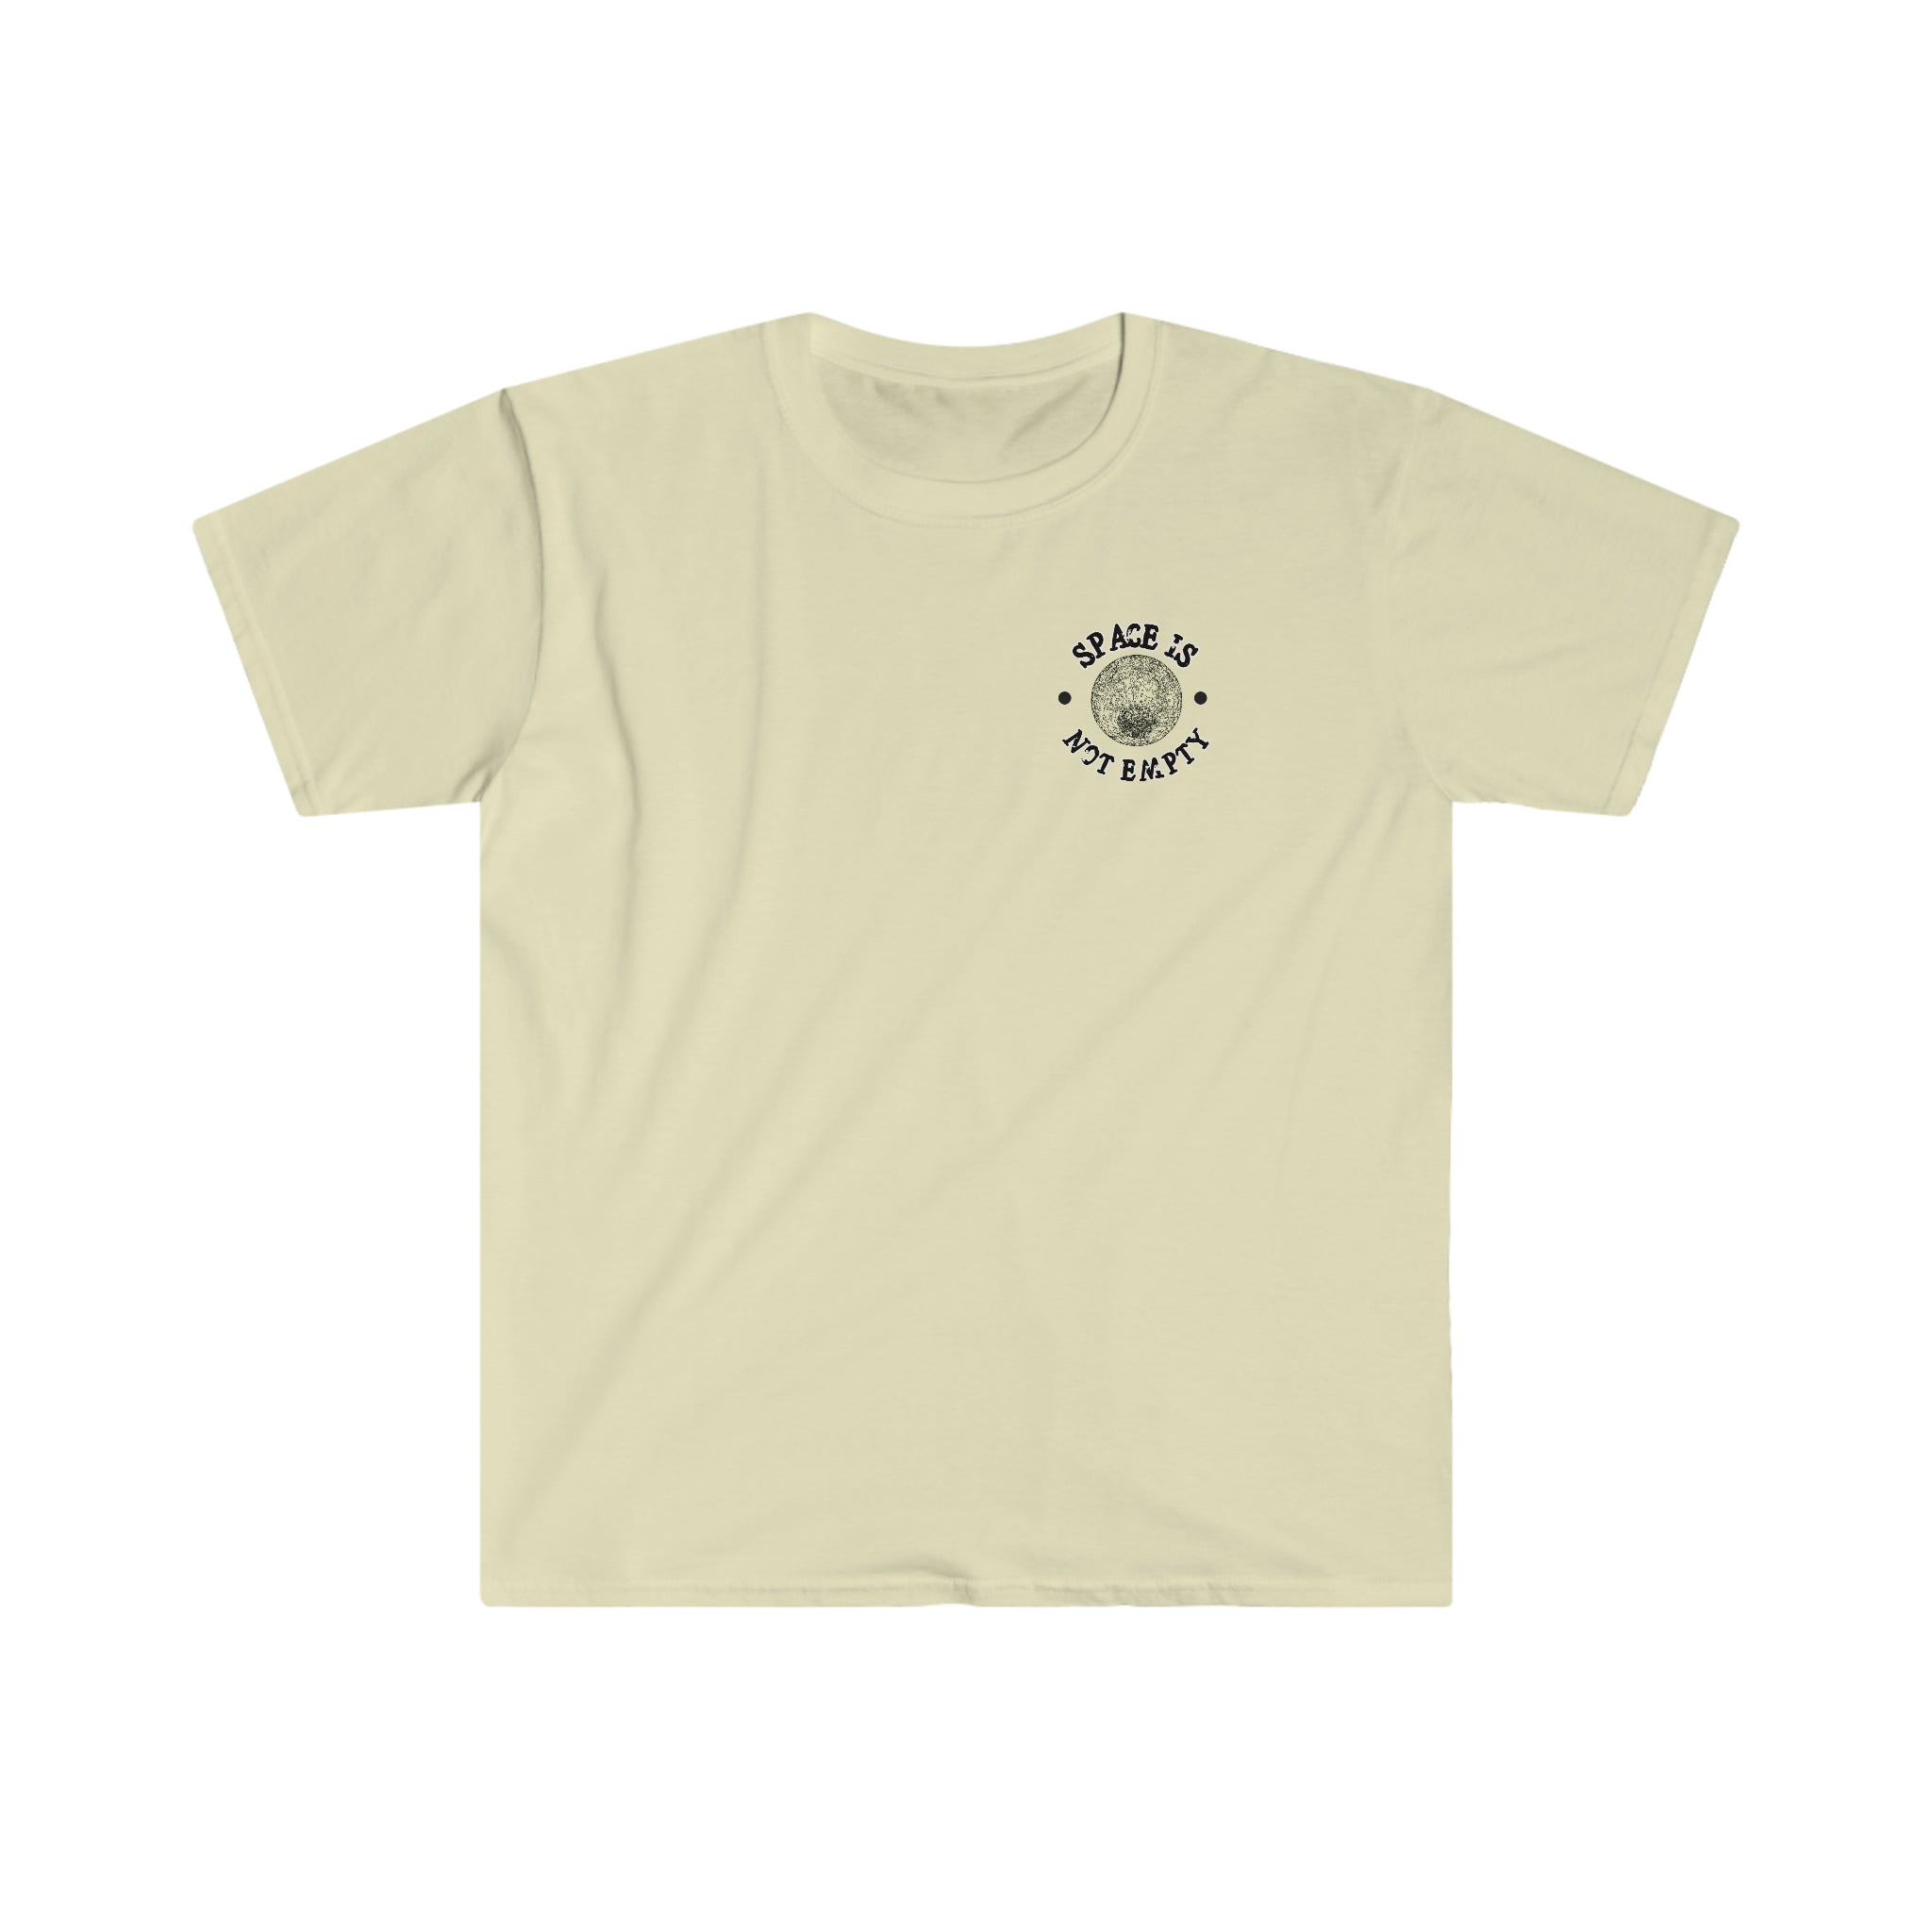 A beige Space is my goal T-Shirt with a black space-themed logo on it, adding style to your wardrobe.